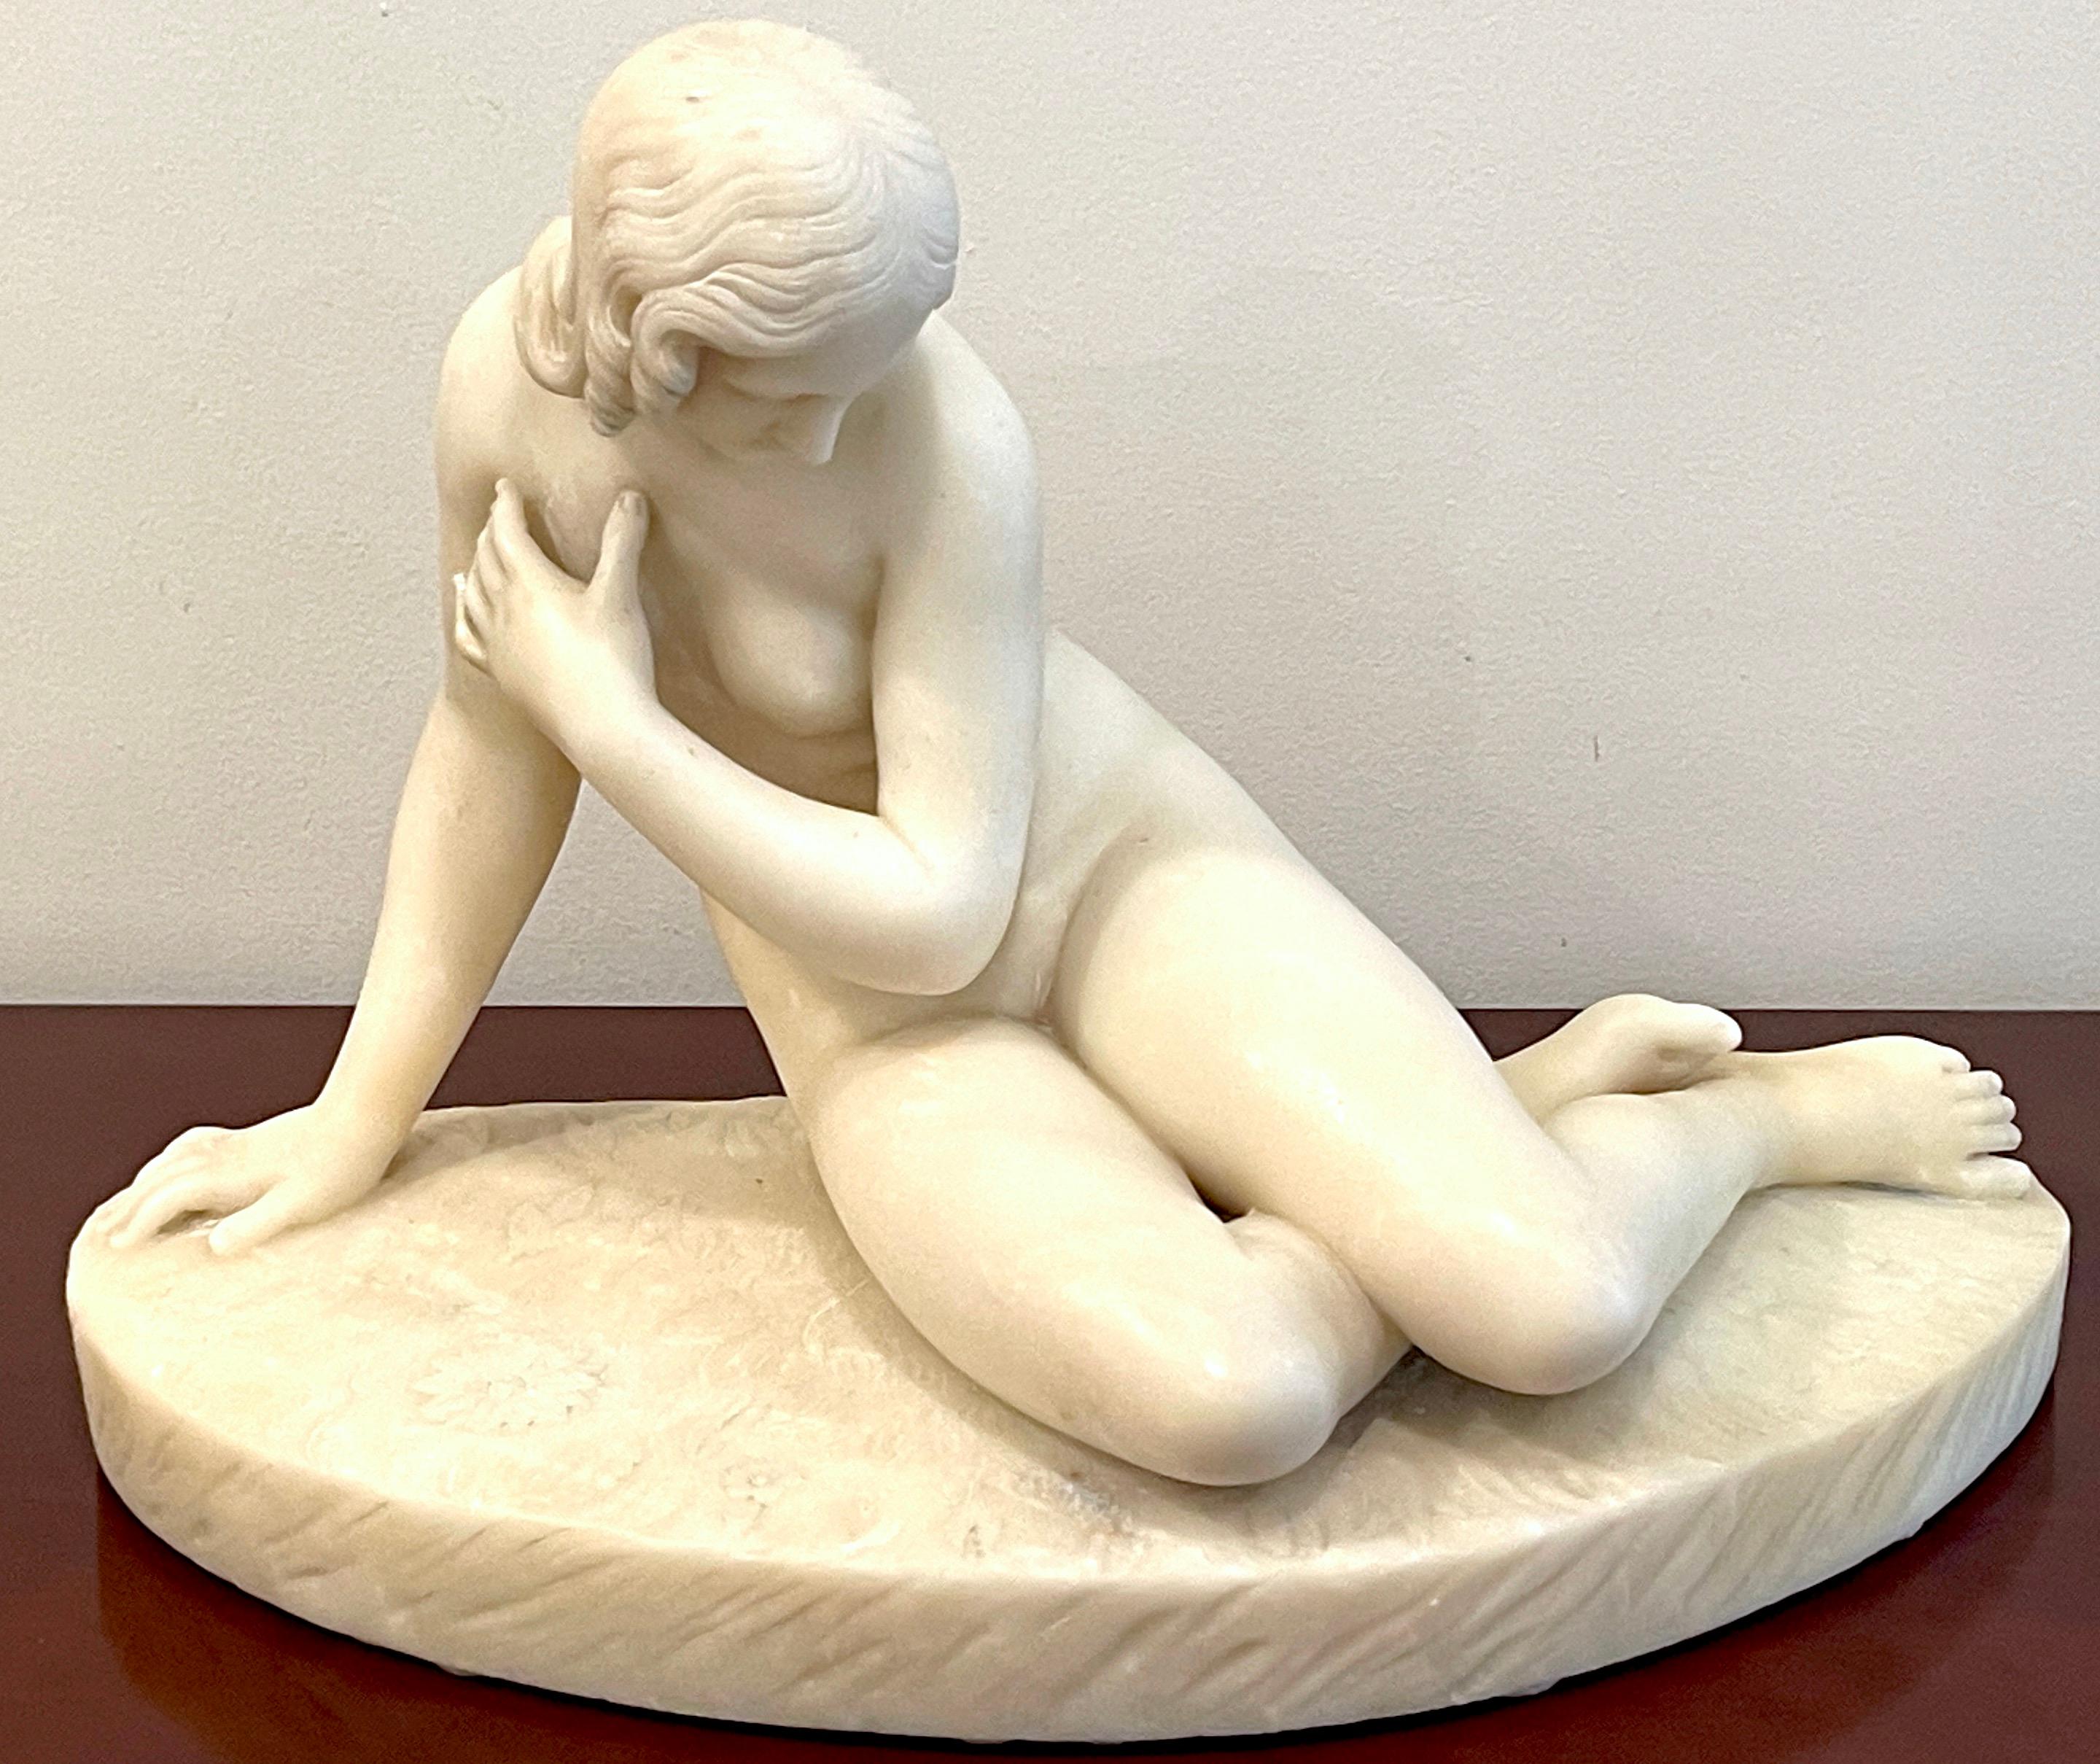 19th Century marble sculpture “Eve at the Fountain”.
After Edward Hodges Baily (1788-1867)
Unsigned, Atelier /English School Work
Last Quarter of 19th Century 

An exceptional posthumous hand carved copy of one of Edward Hodges Baily's renowned